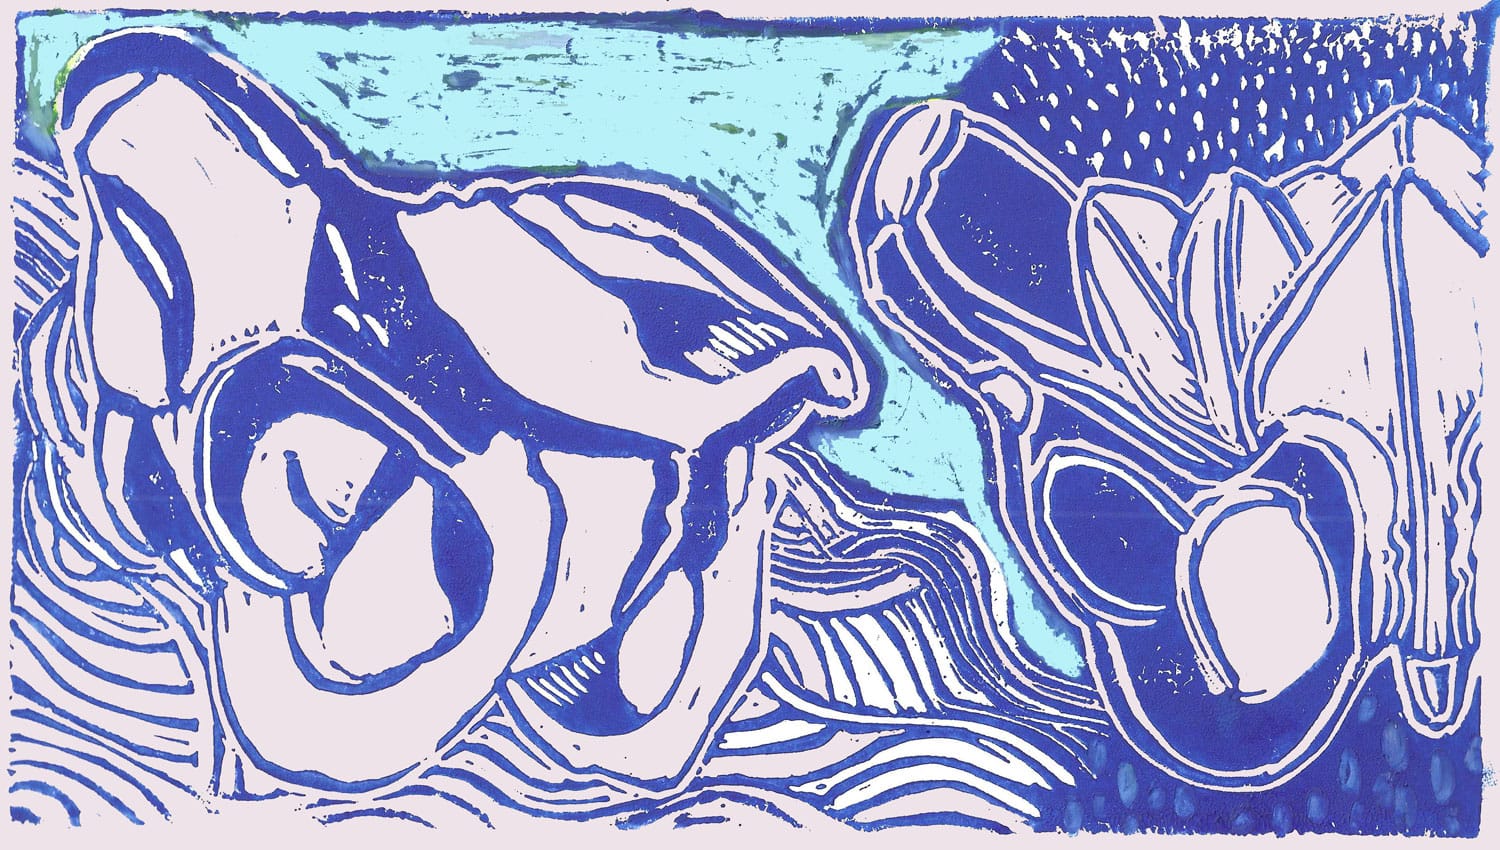 "HIPbones" block print of two female pelvises with a lotus flower in one, some blue color from oil pastel, purple inks some blue background and waveforms